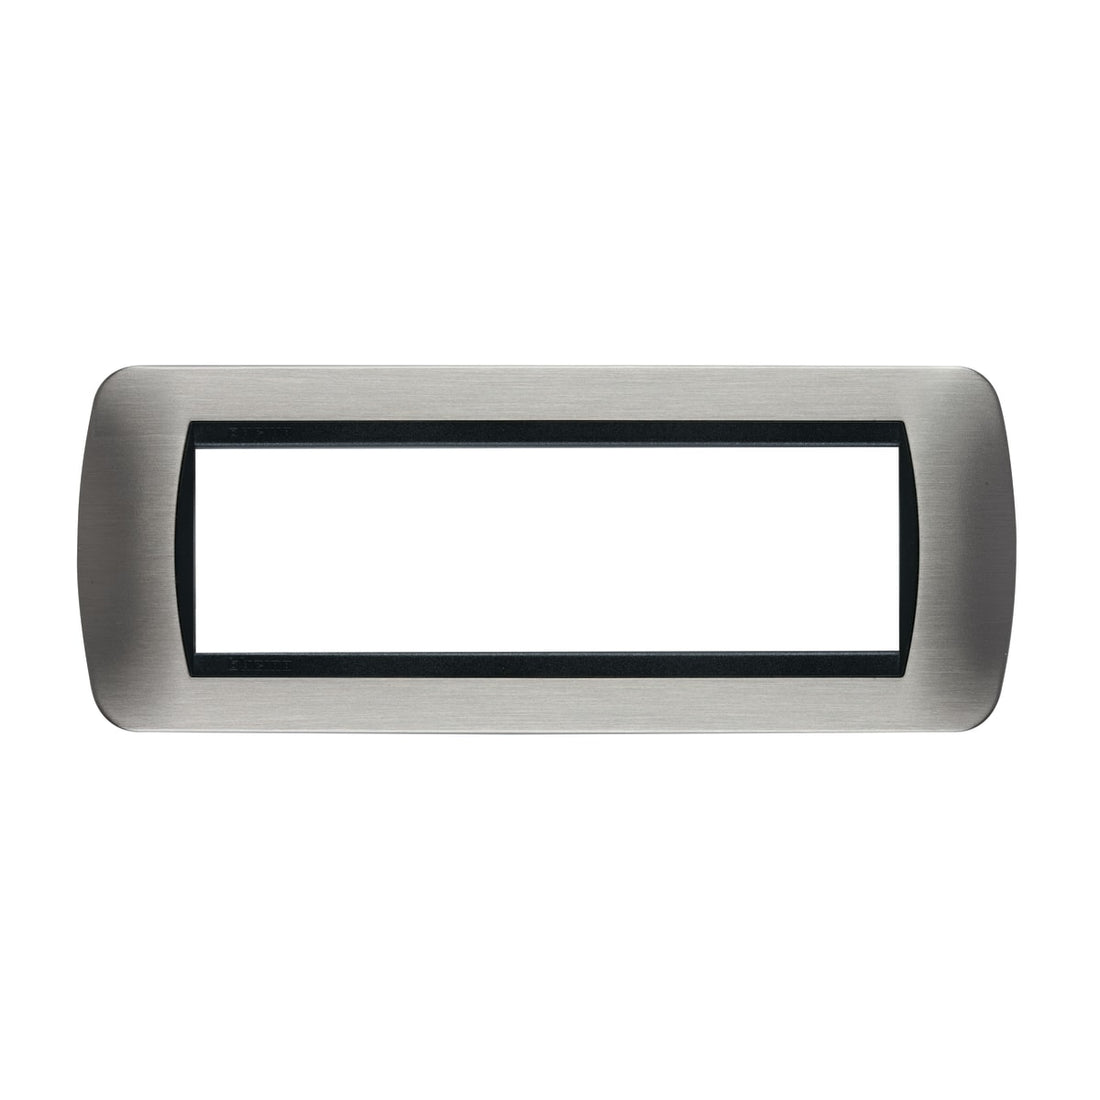 PLATE LIVING INTERNATIONAL 7 PLACES BRUSHED STEEL